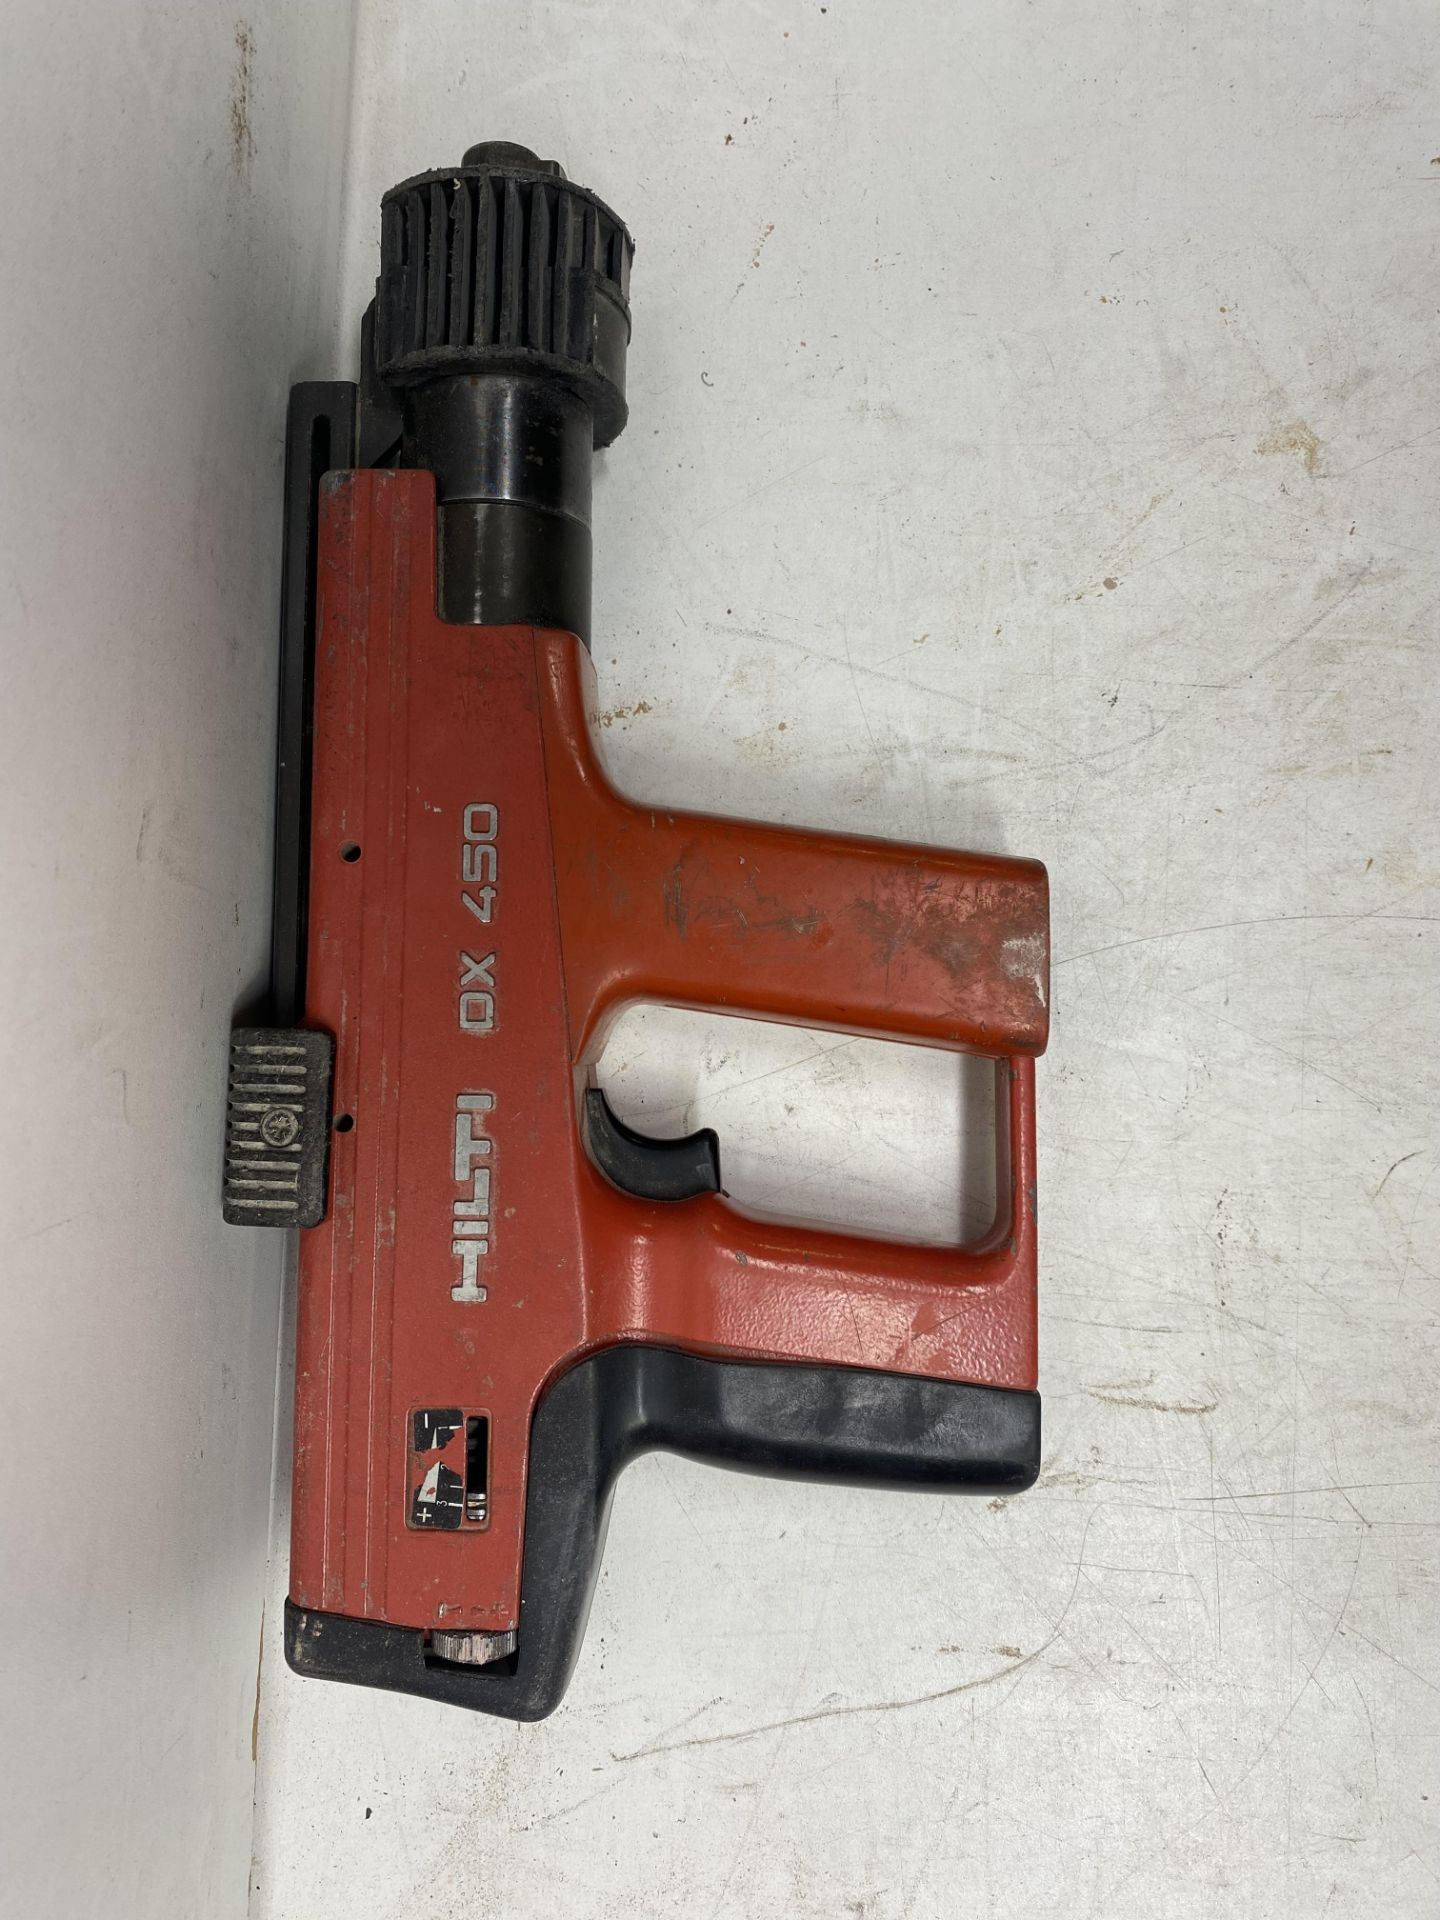 Hilti Dx450 Cordless Power Actuated Nail Gun - Image 3 of 9